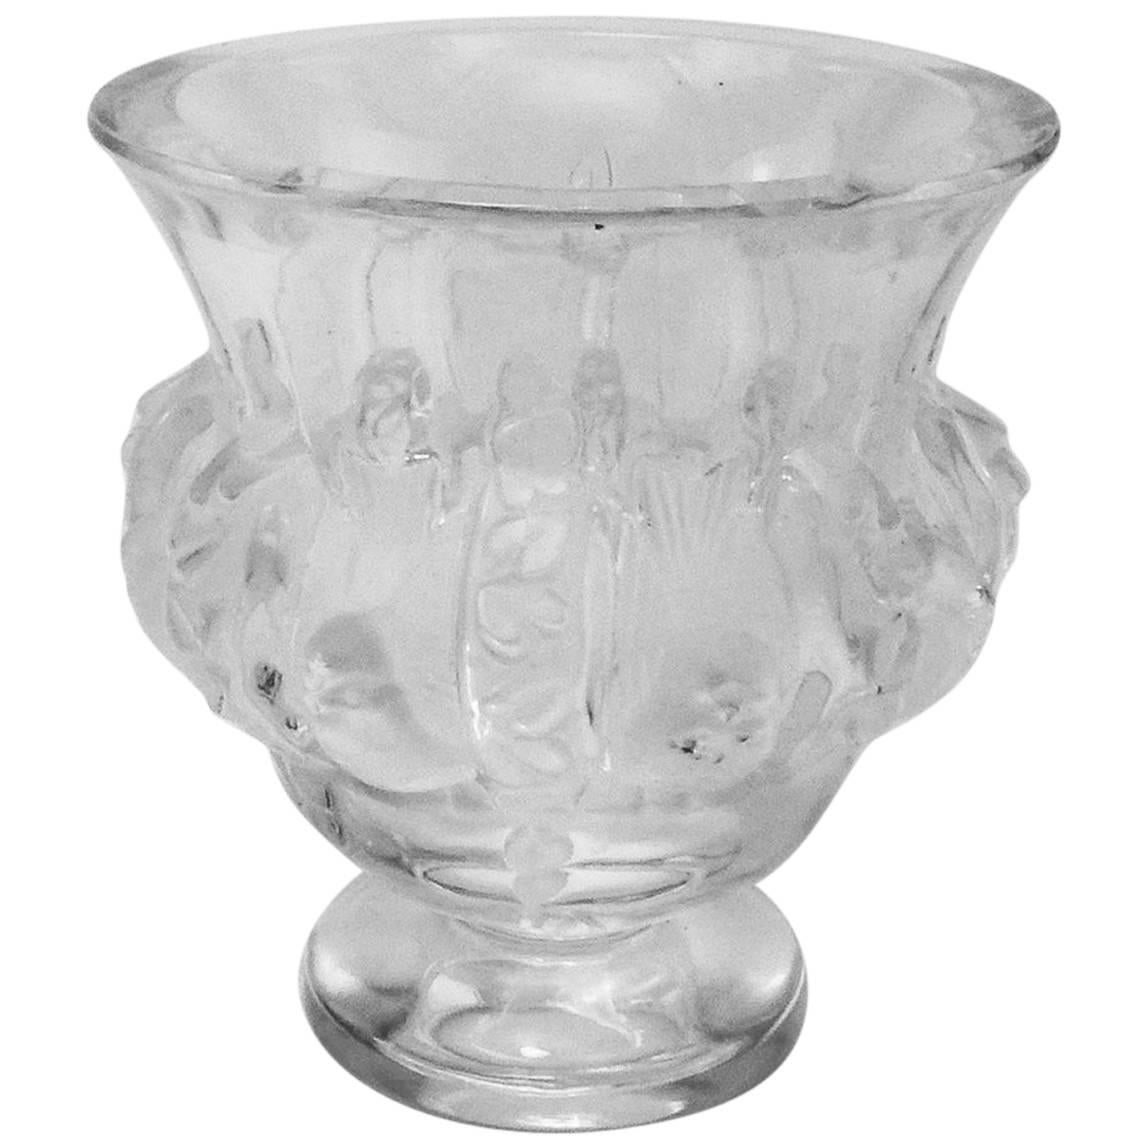 French Art Deco Style Lalique Colorless and Frosted Crystal Dampierre Vase